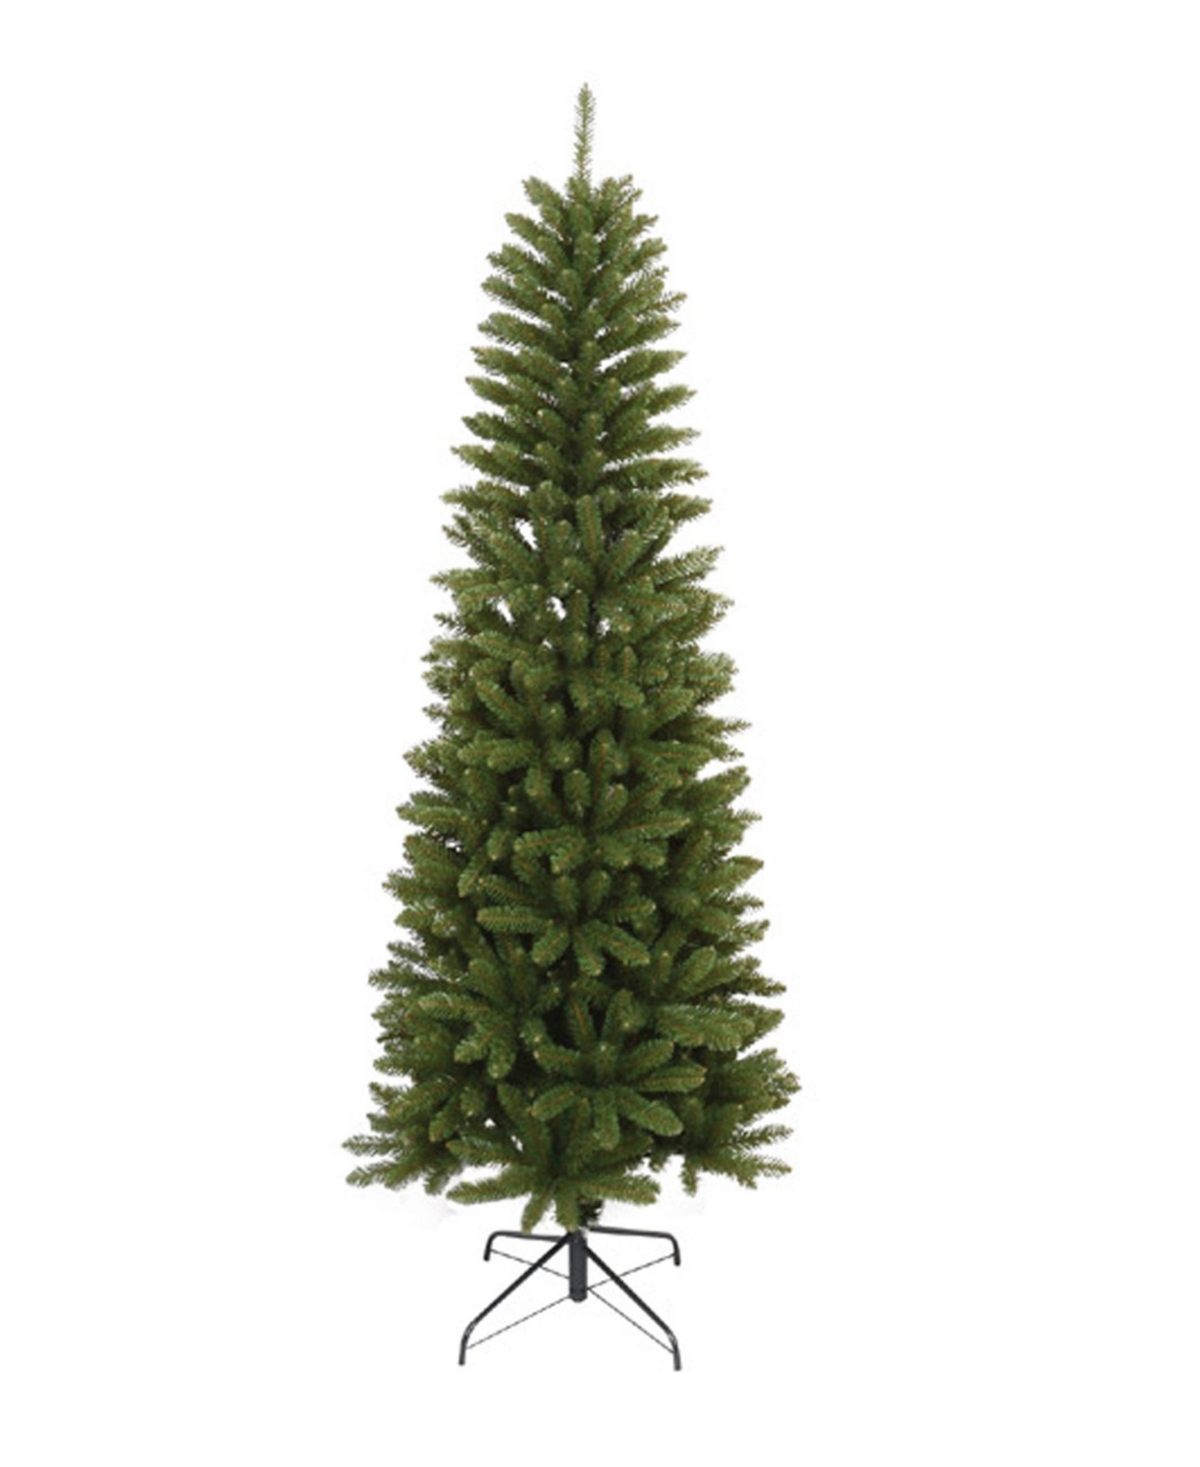 6.5' Slim Tree with 762 Tips - Green